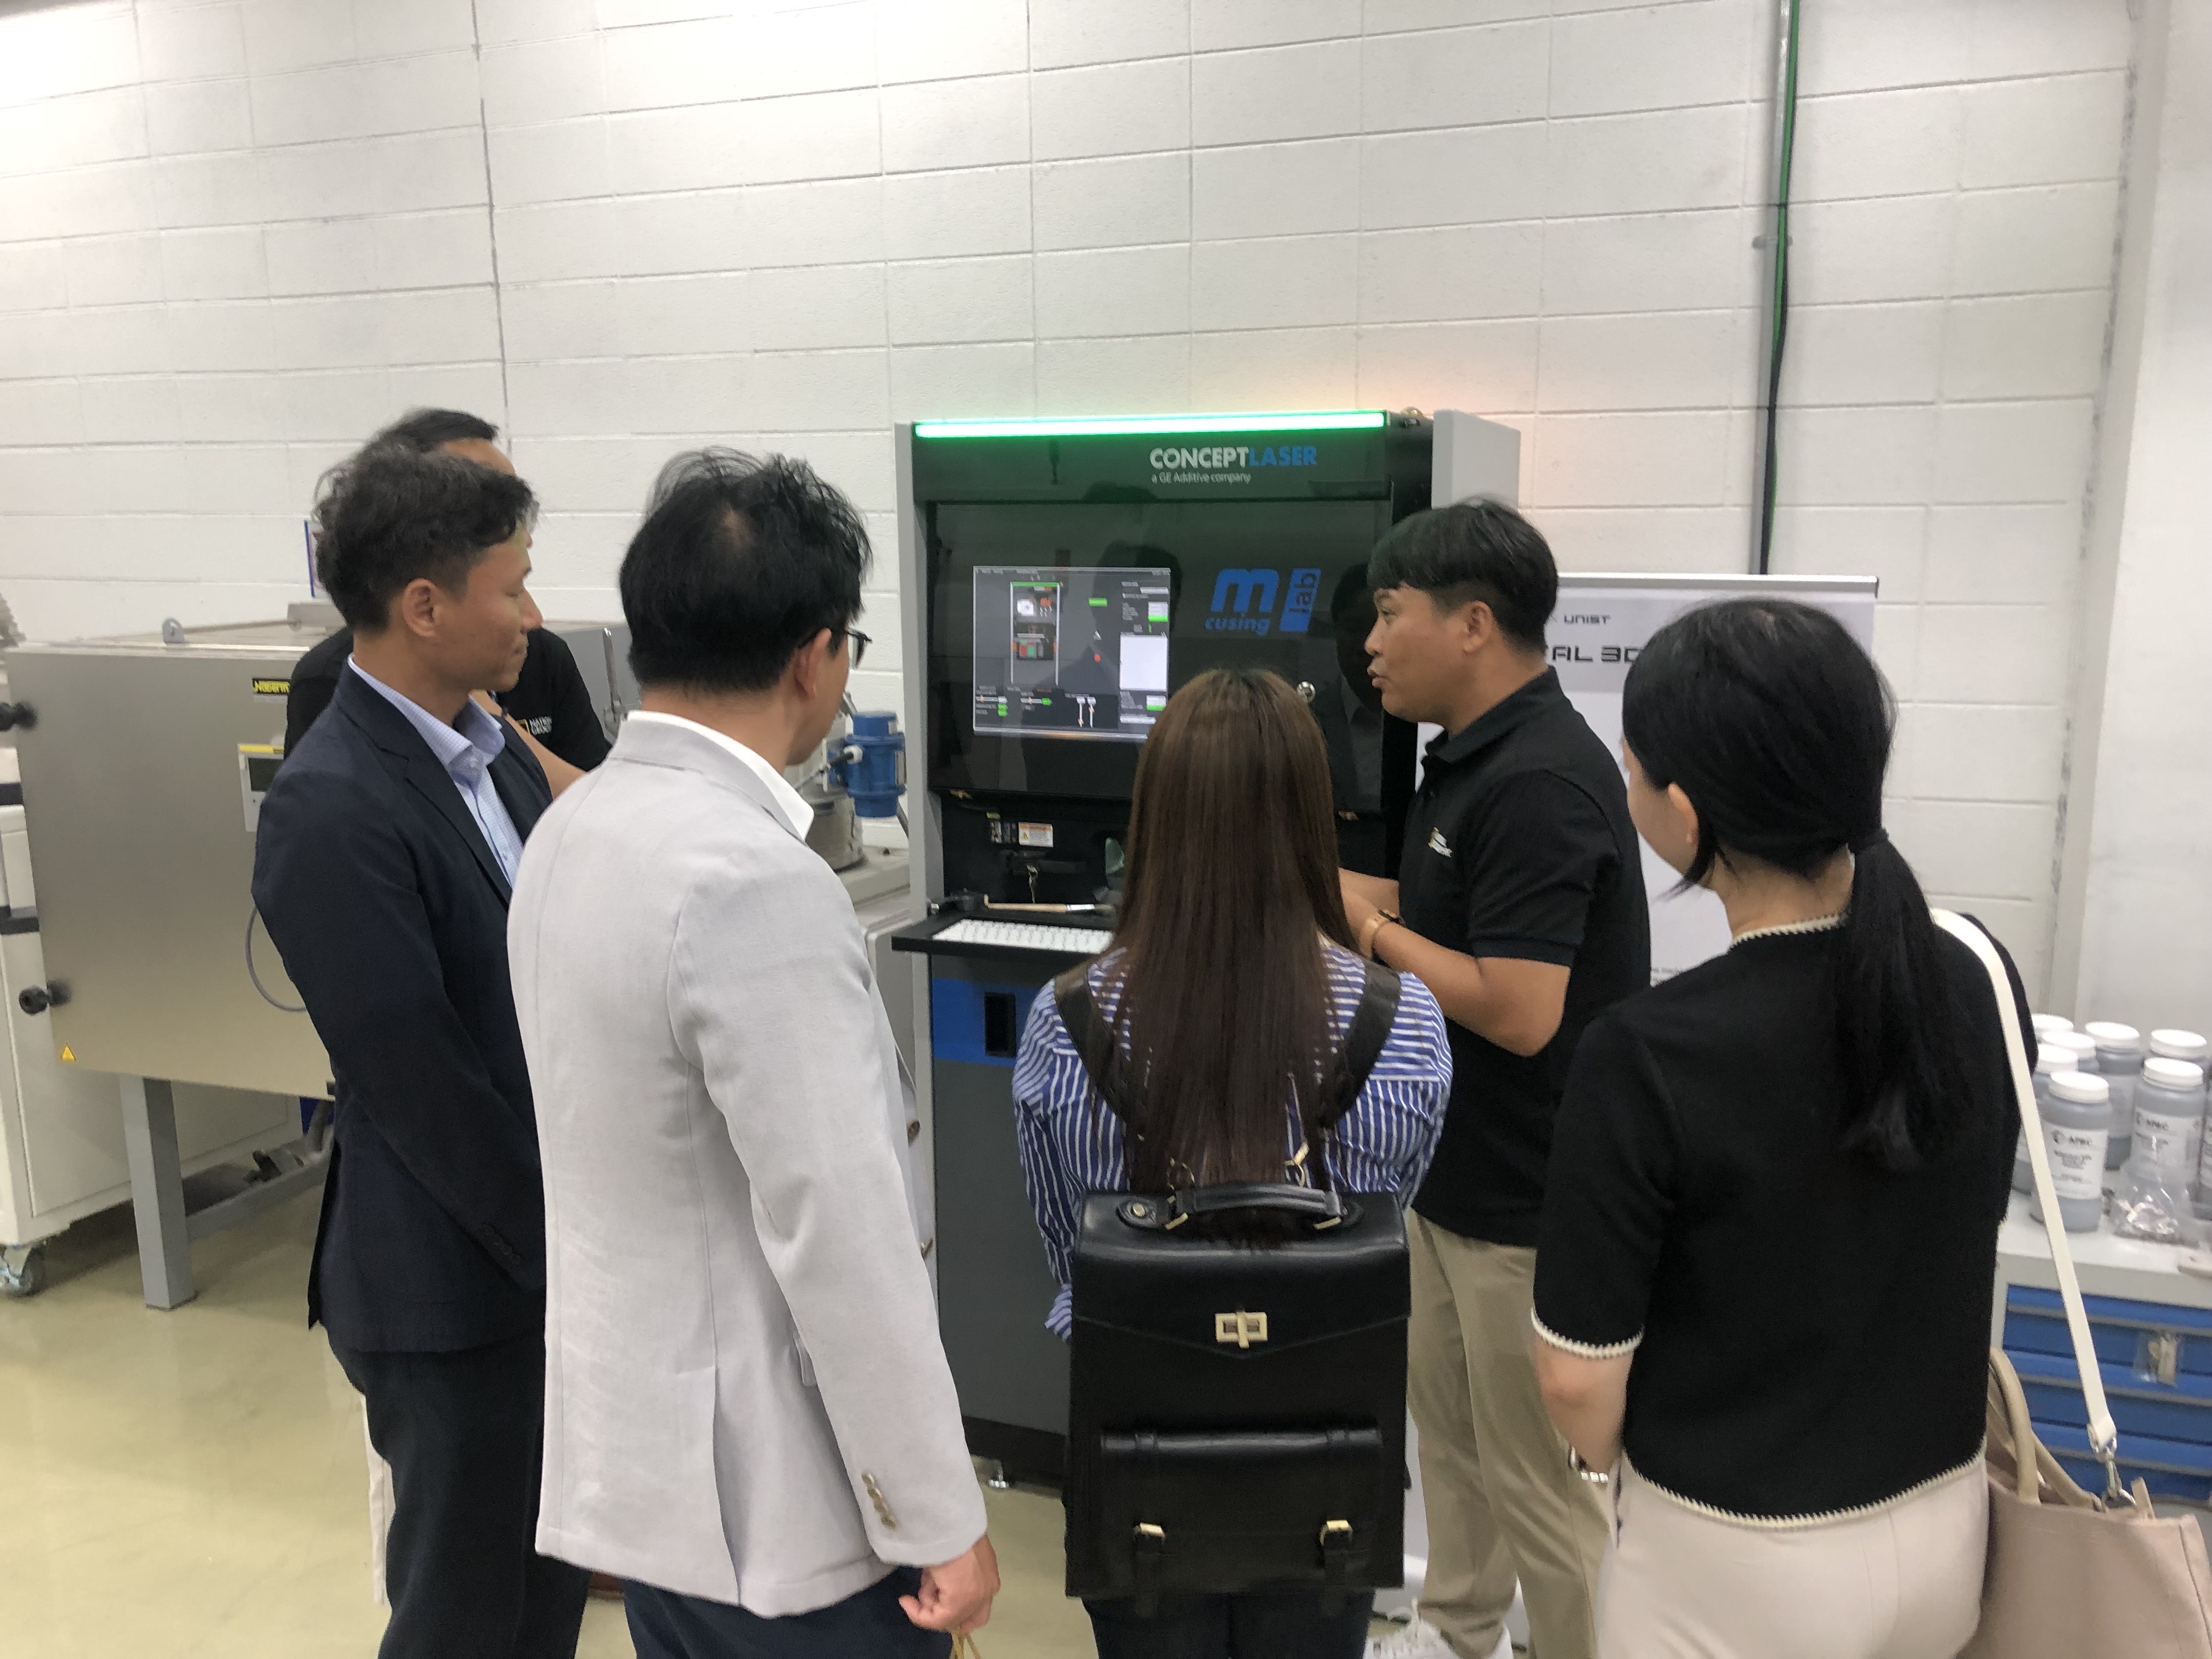 Prior to the signing ceremony, attendees had the opportunity to get a glimpse of the state-of-the-art facilities at the UNIST 3D Printing Convergence Technology Center.